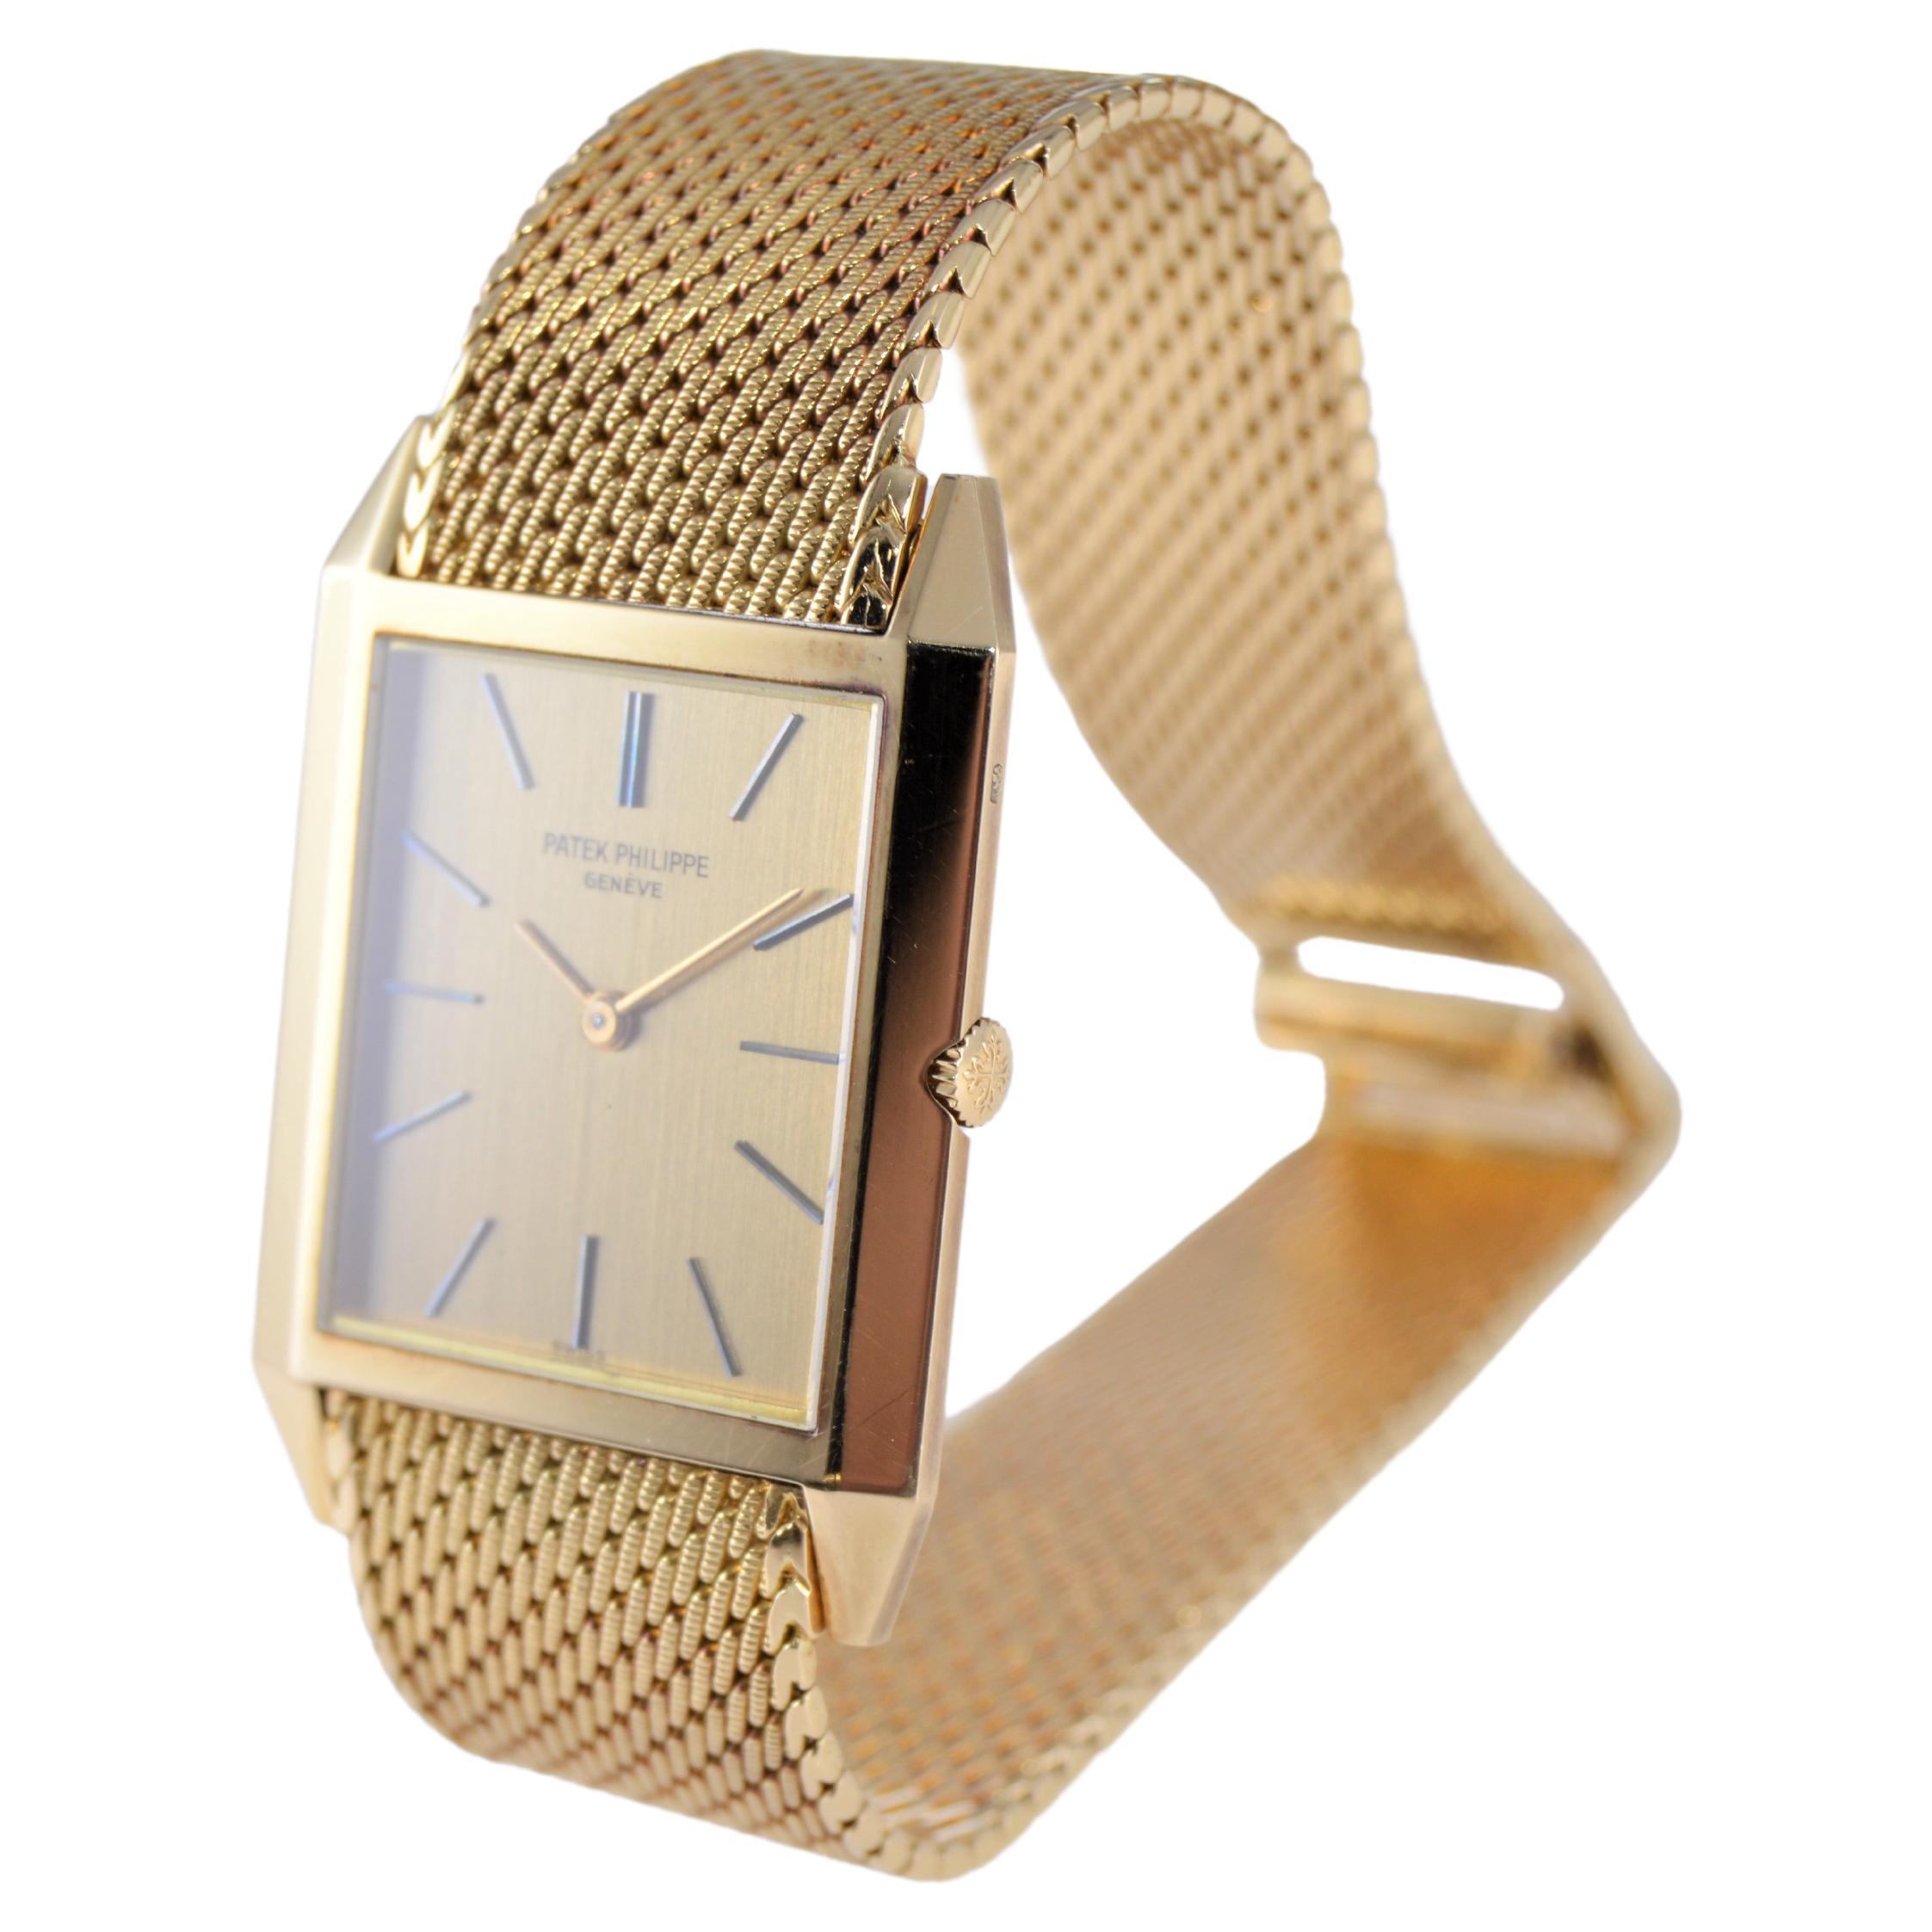 Patek Philippe 18Kt. Solid Yellow Gold Bracelet Watch 1980's with Original Dial In Excellent Condition For Sale In Long Beach, CA